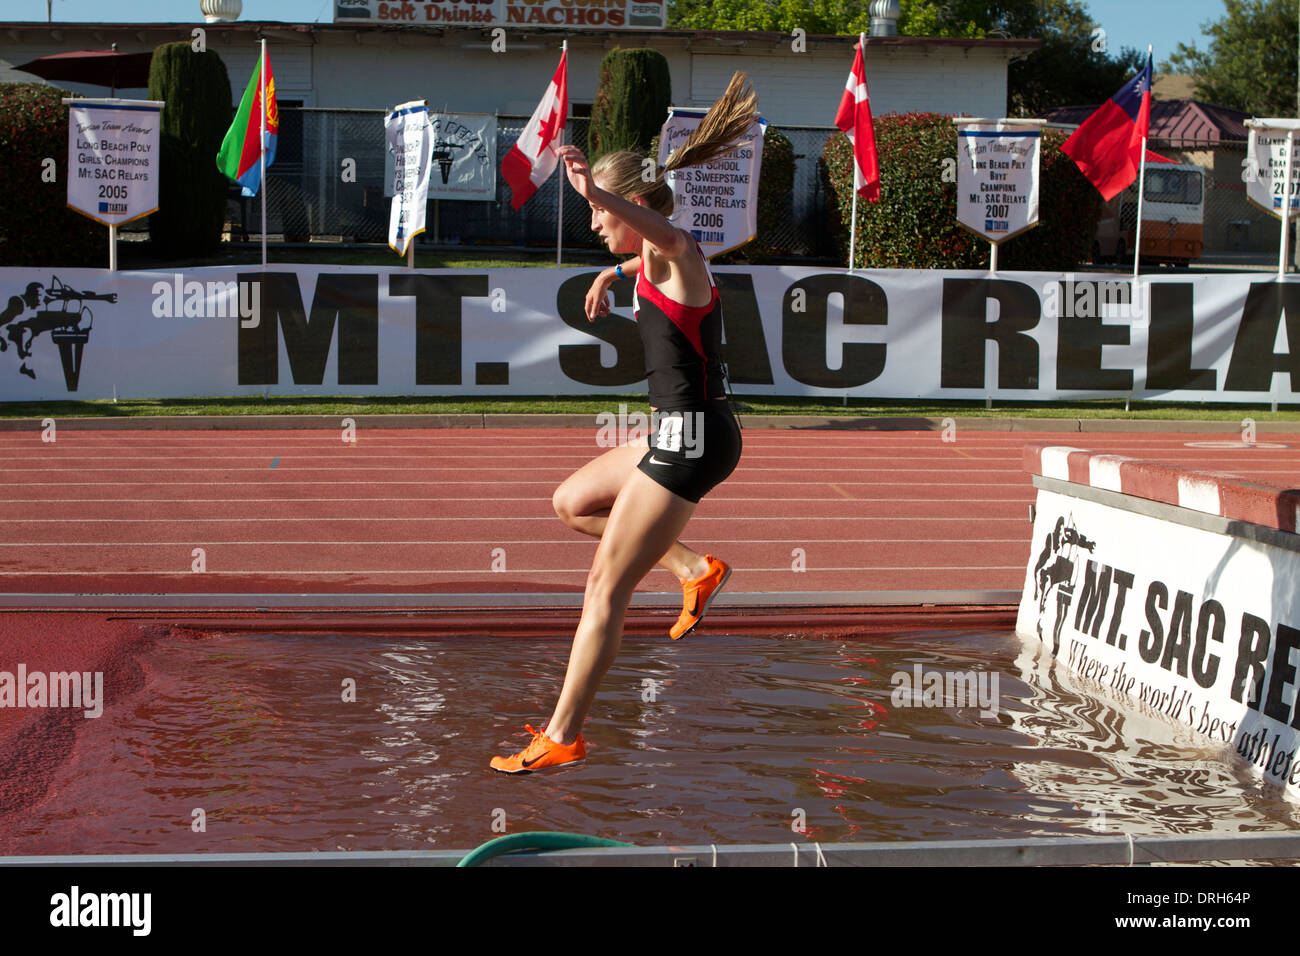 Female athletes at the water jump during a steeplechase race at an American track and field meet in California Stock Photo